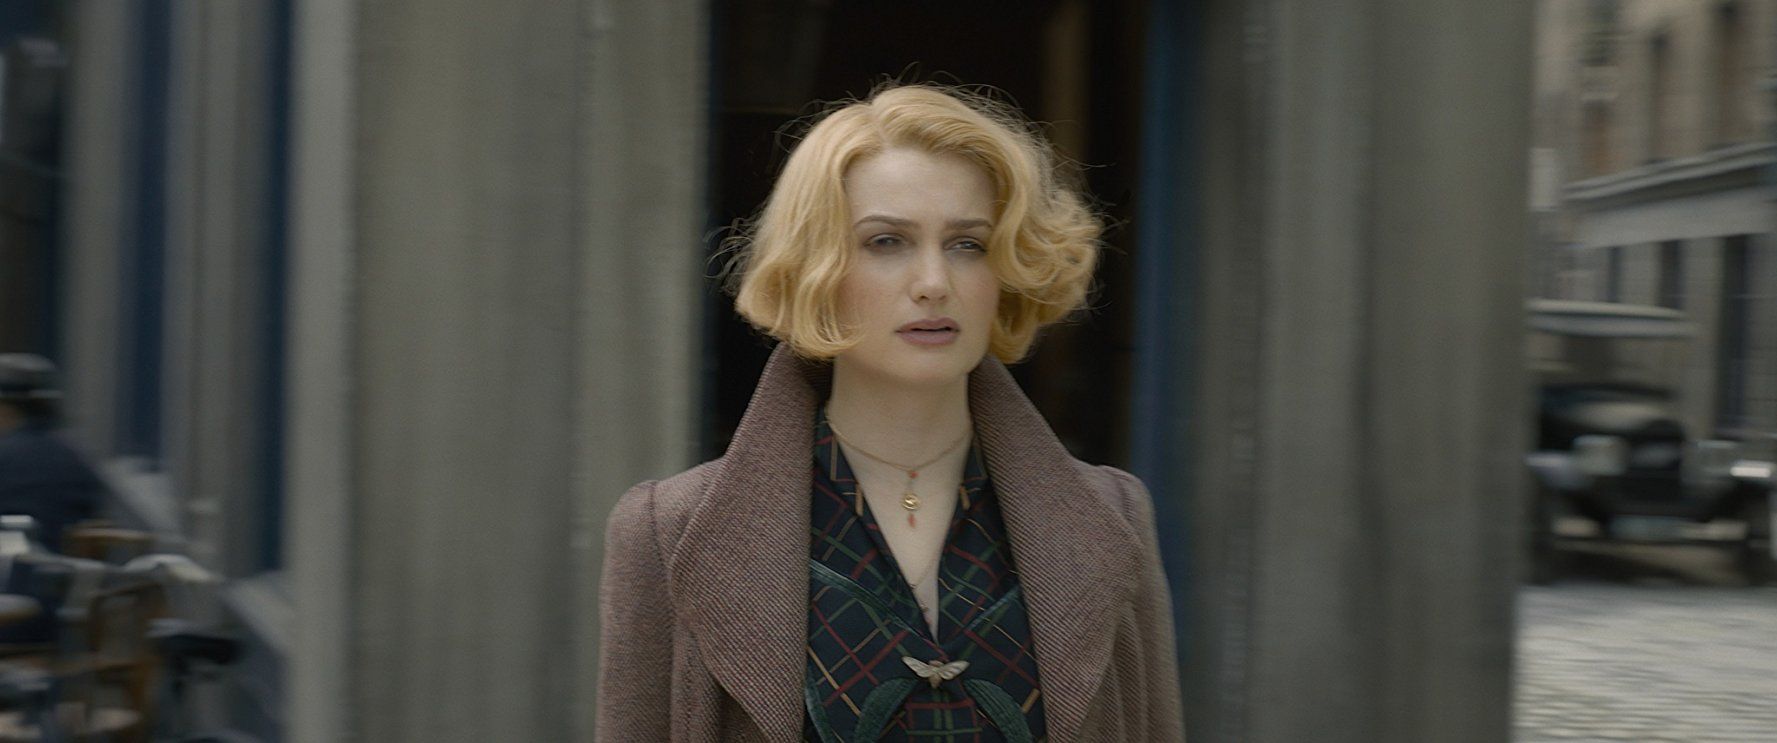 Alison Sudol in Fantastic Beasts: The Crimes of Grindelwald (2018). Fantastic beasts, Fantastic beasts Crimes of grindelwald